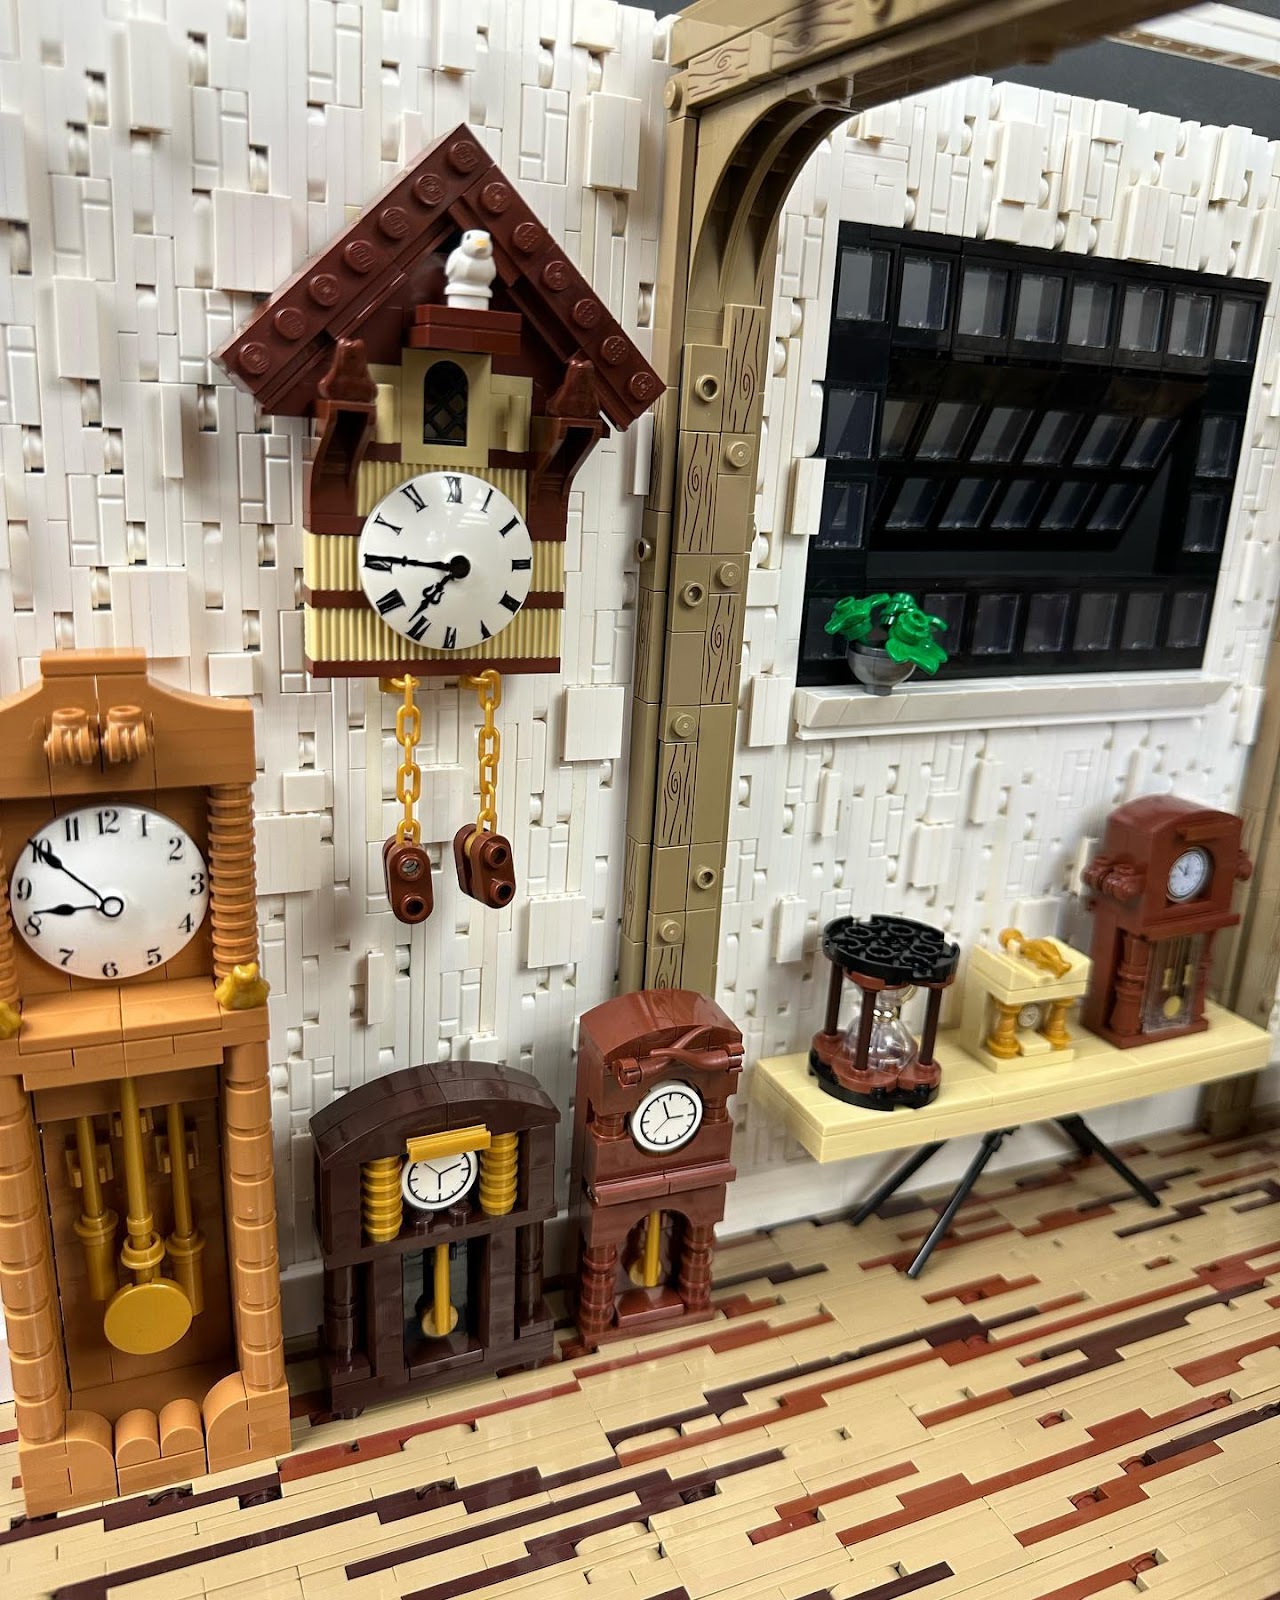 A close-up photograph of Kelly's LEGO creation Clockmaker's Studio, showing several grandfather clocks, pendulum clocks and a cuckoo clock